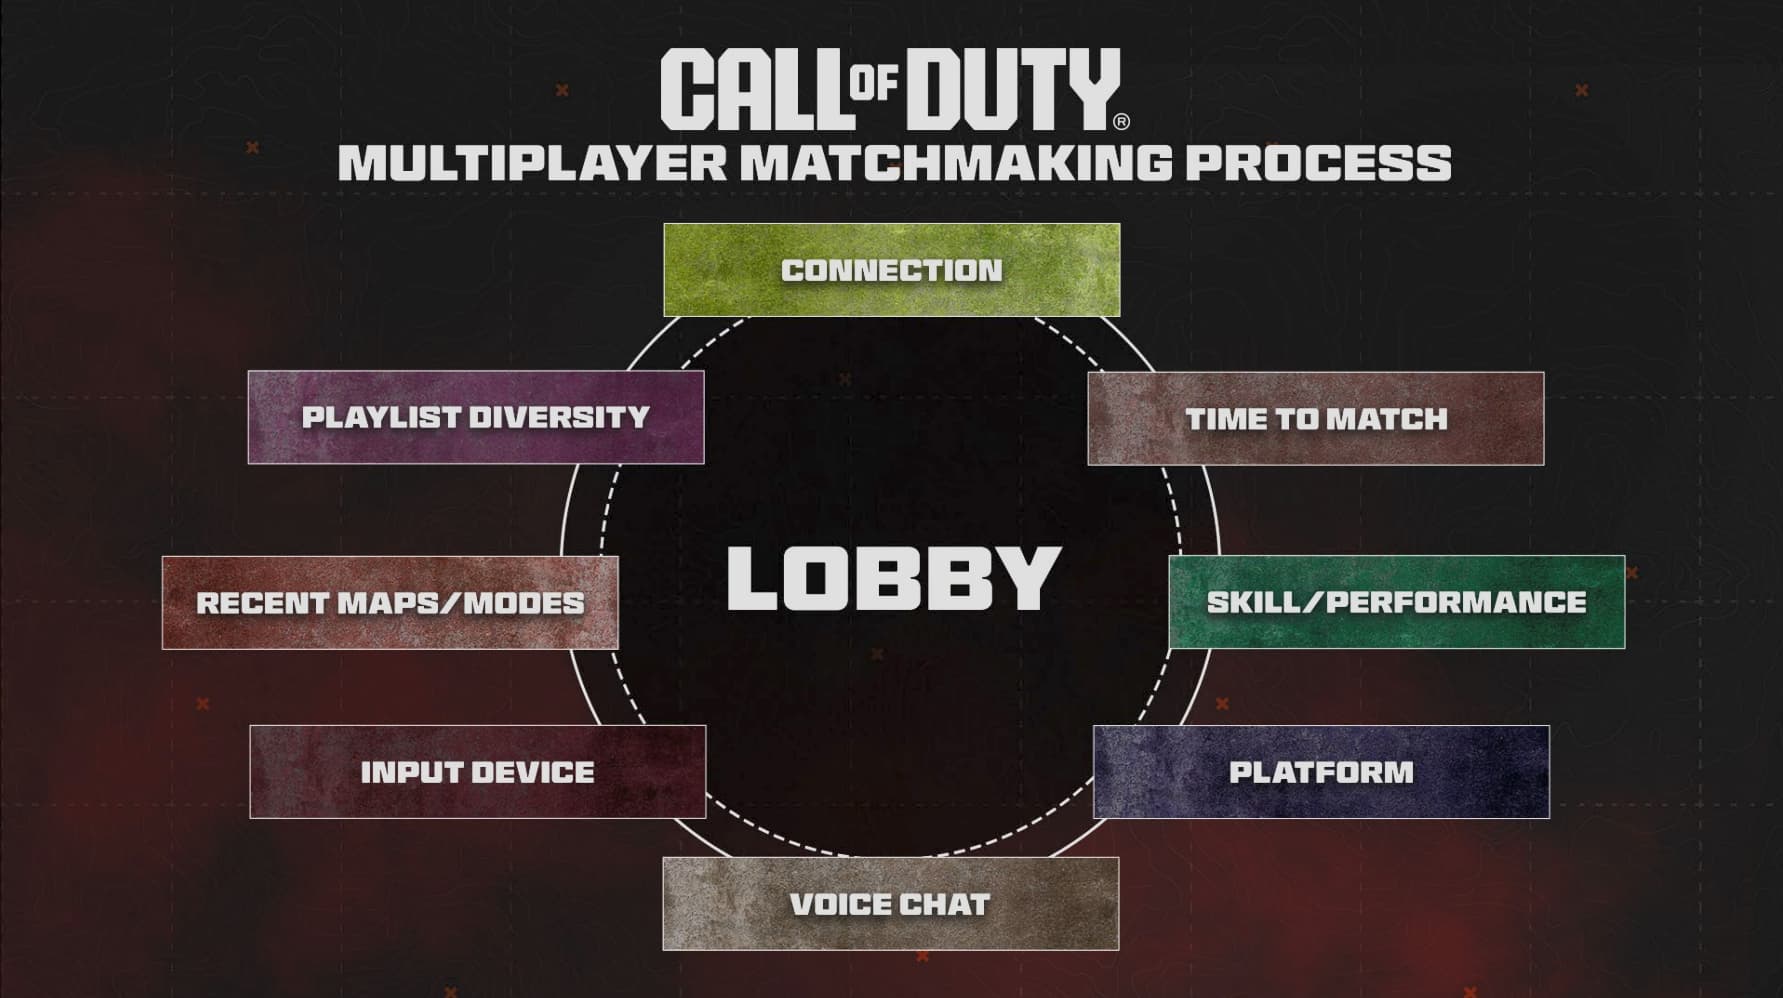 Call of Duty matchmaking